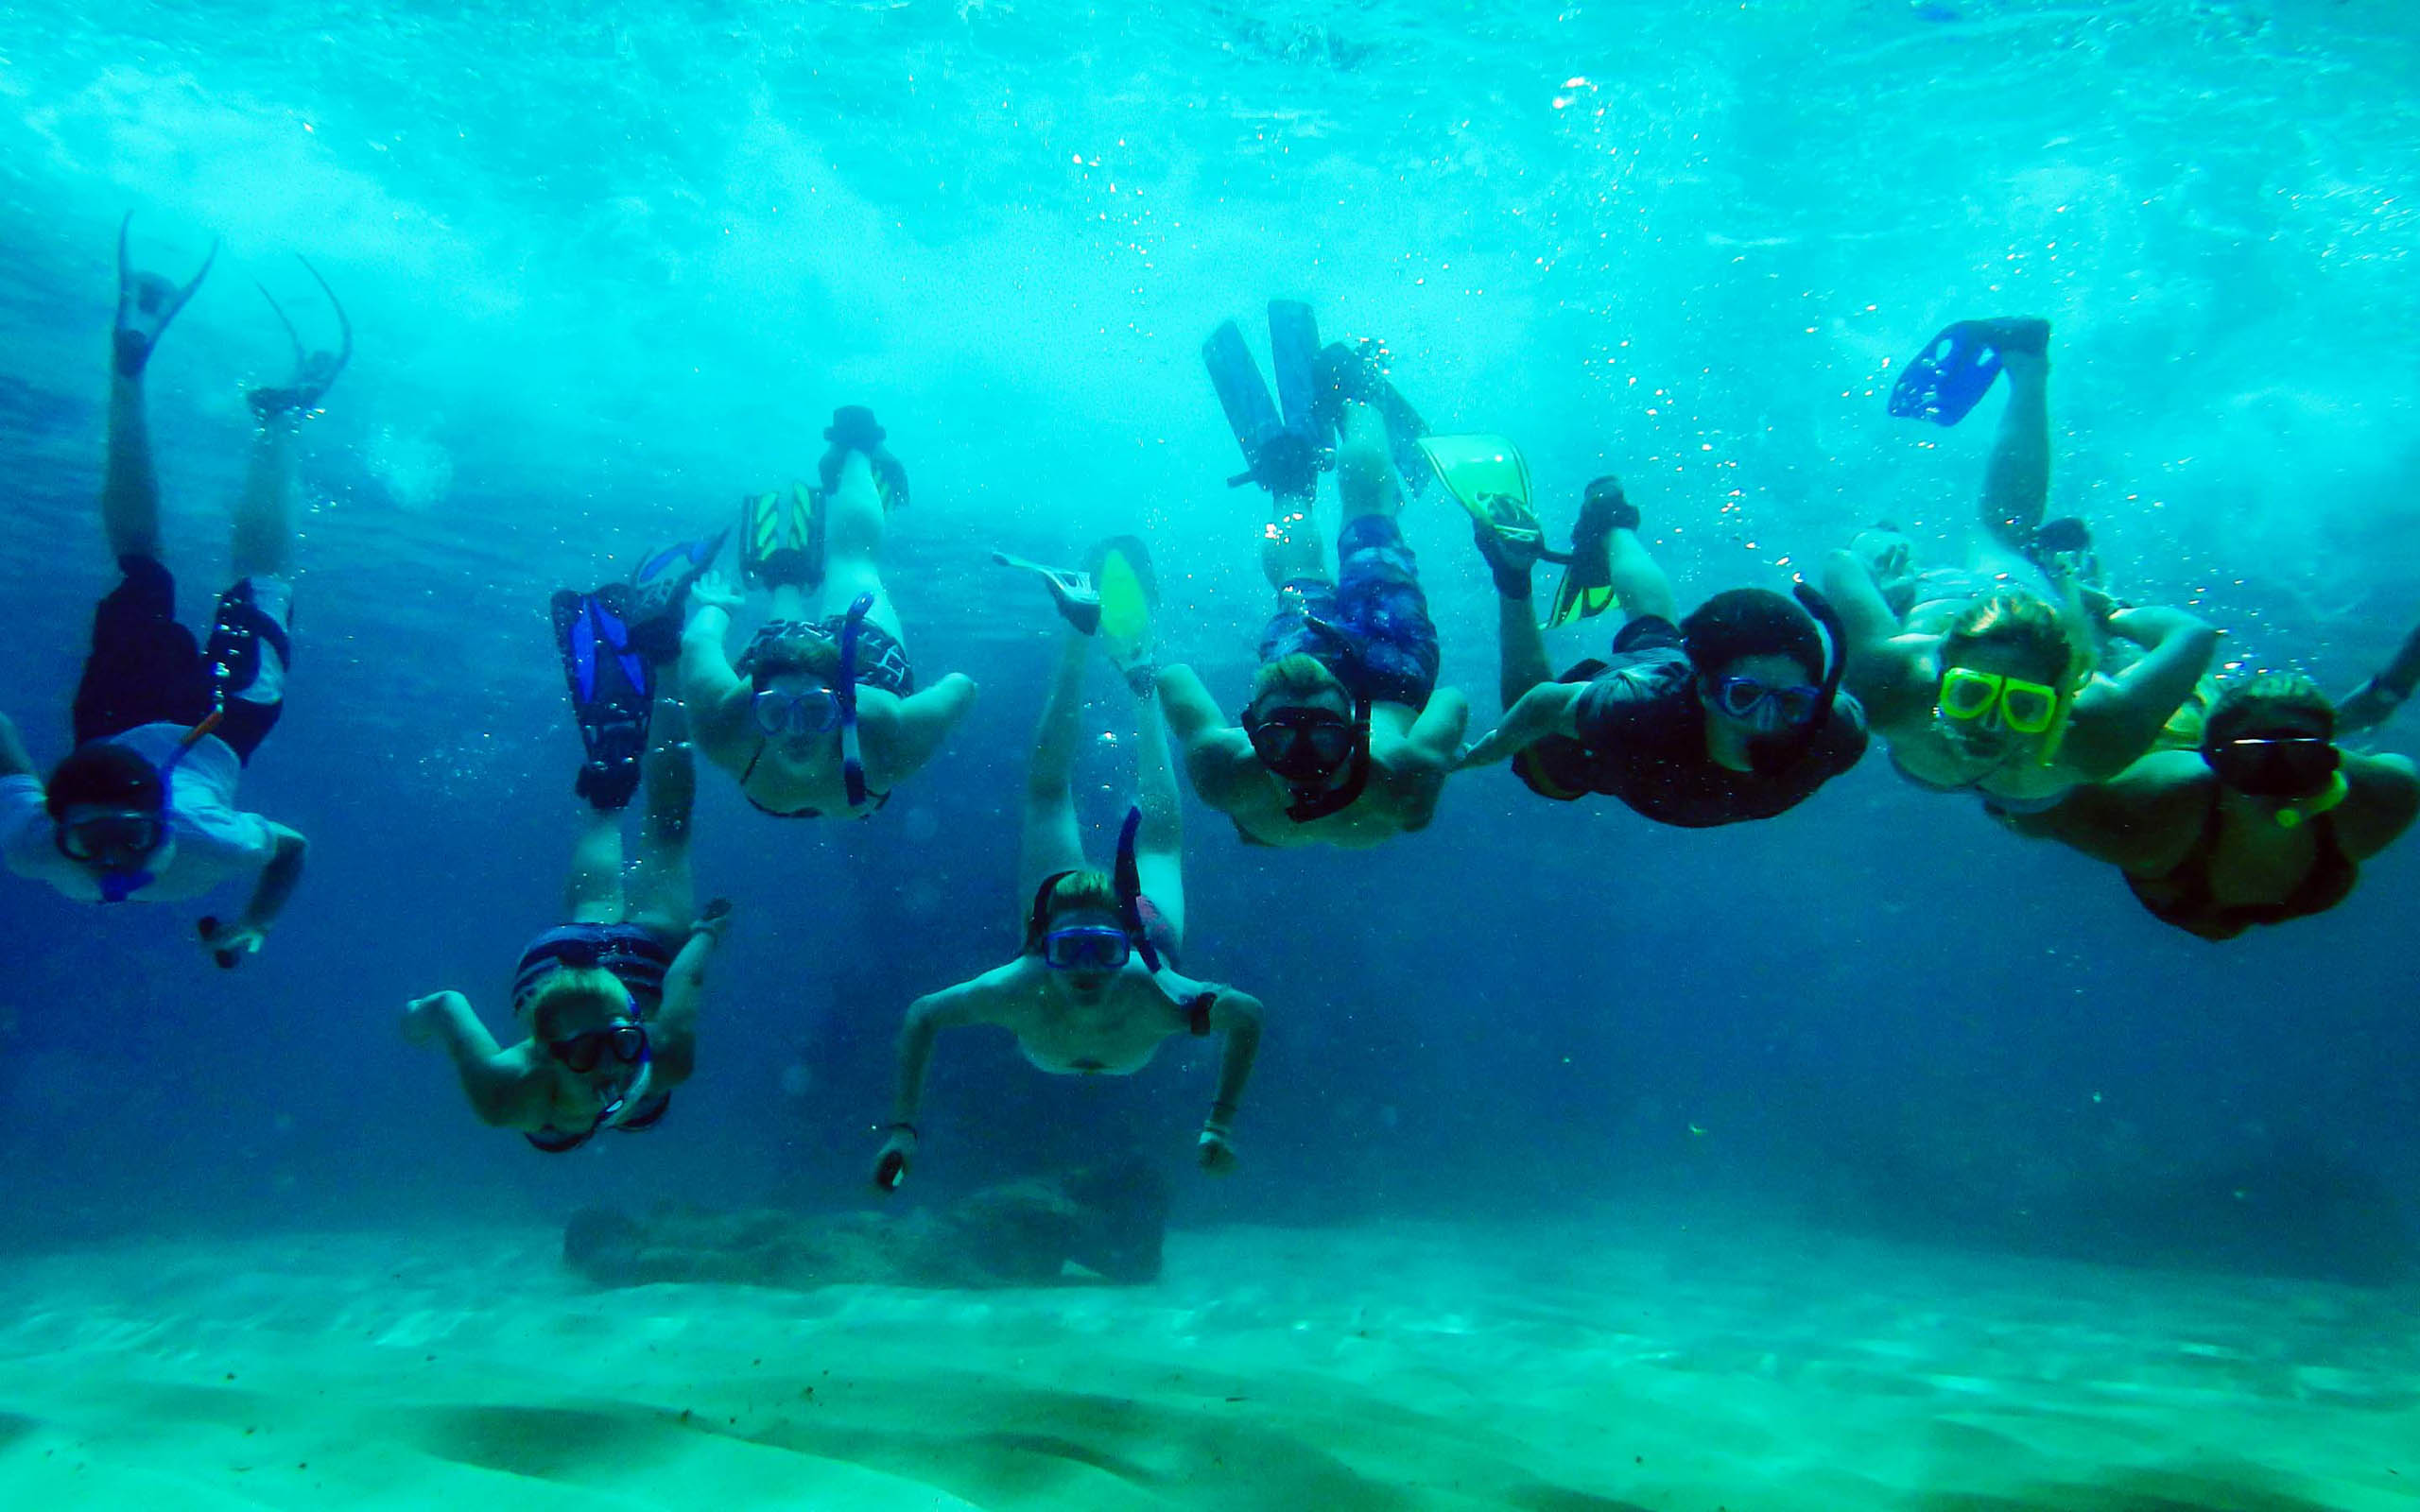 A group of people snorkling under the water.